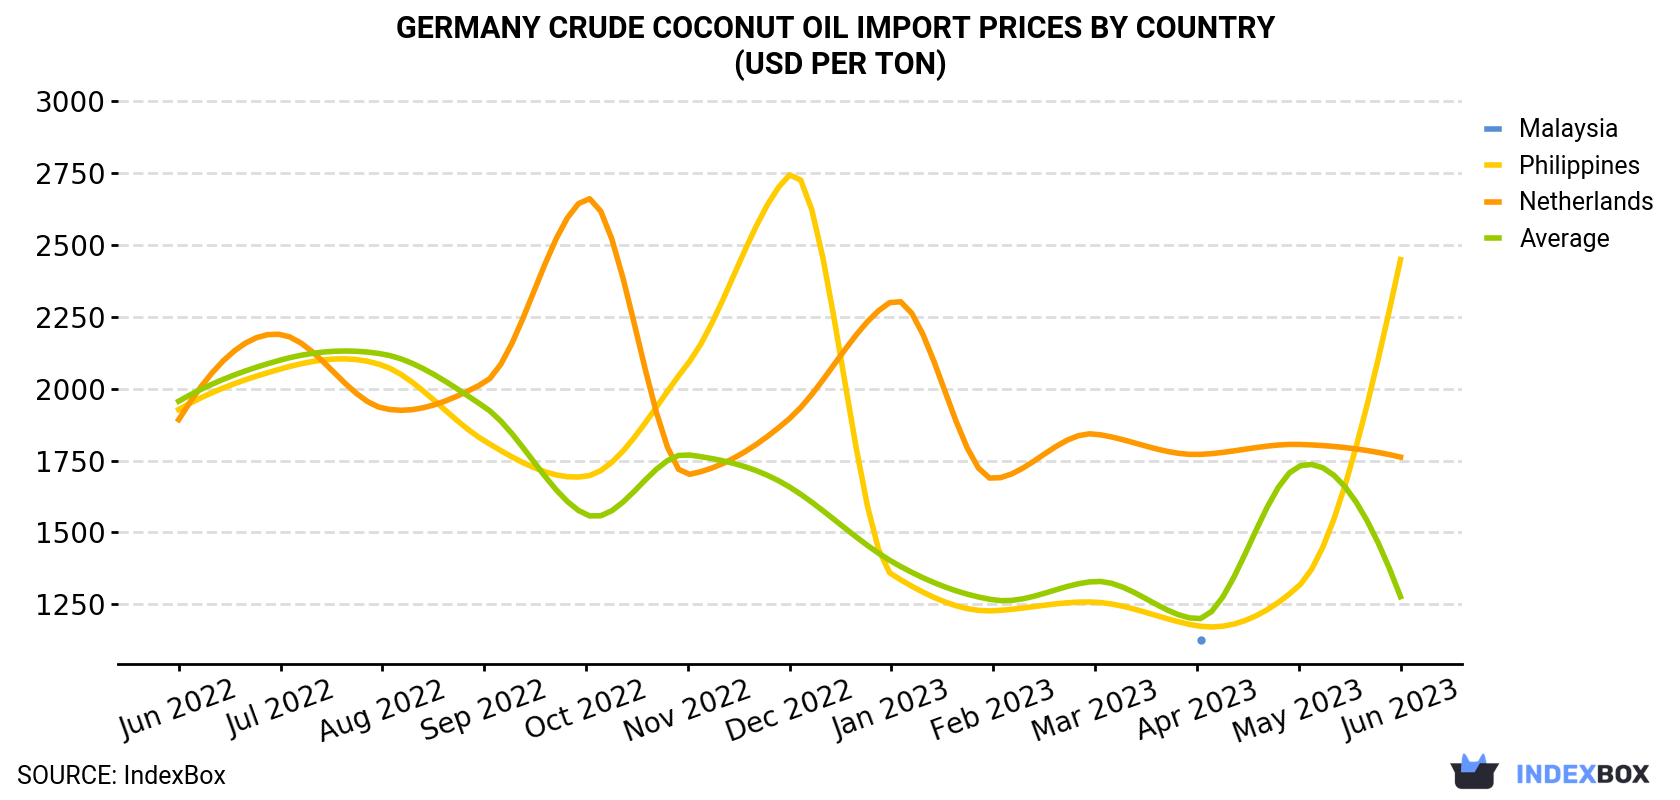 Germany Crude Coconut Oil Import Prices By Country (USD Per Ton)